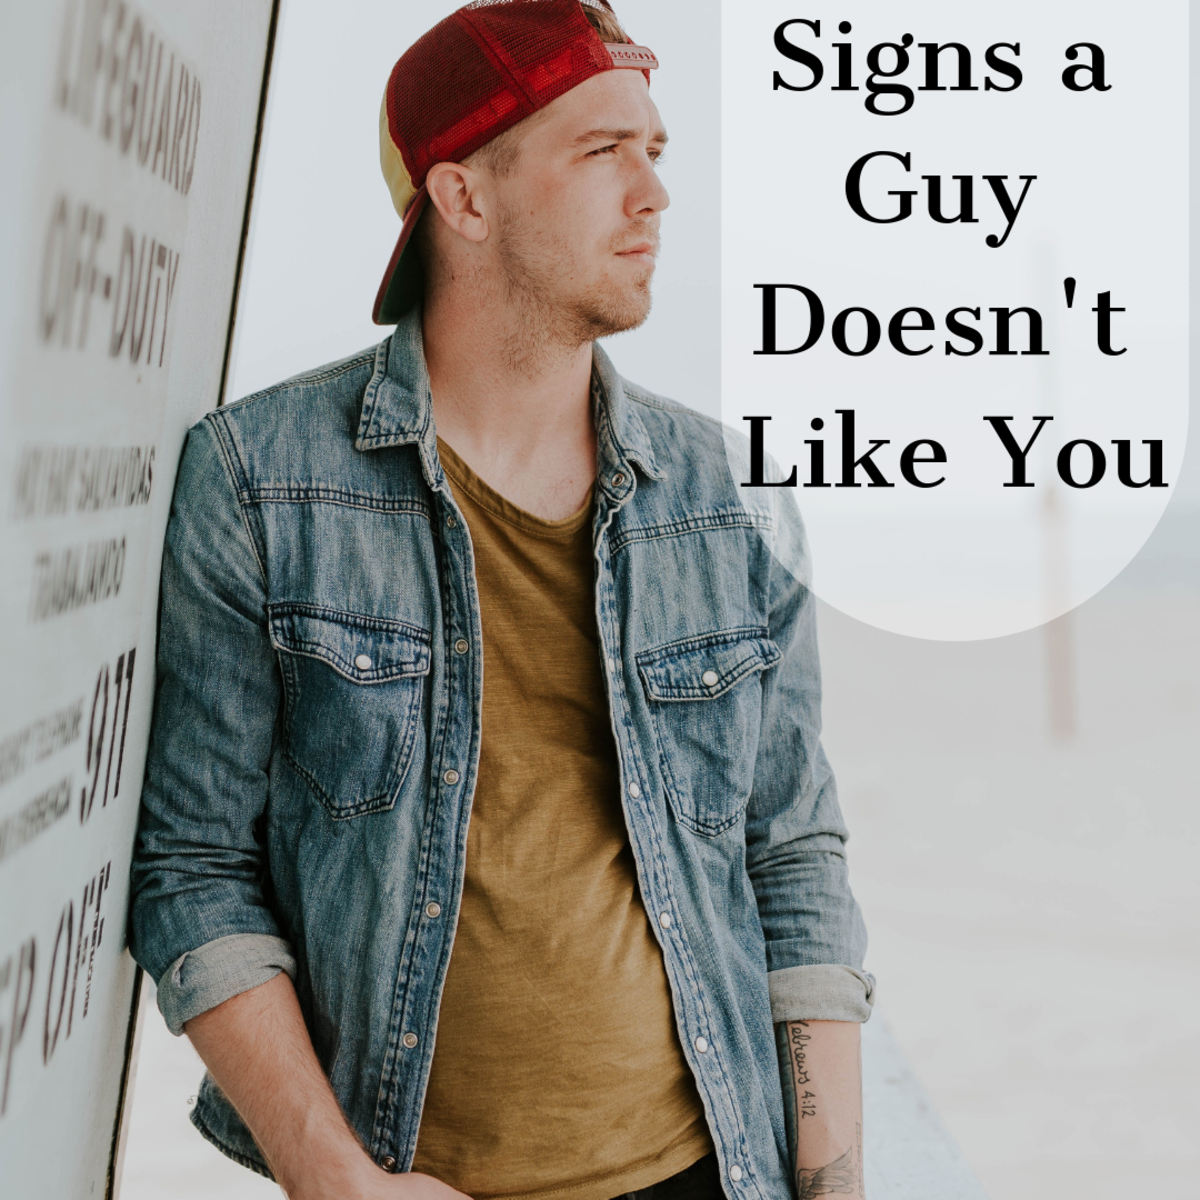 Signs a man is not interested